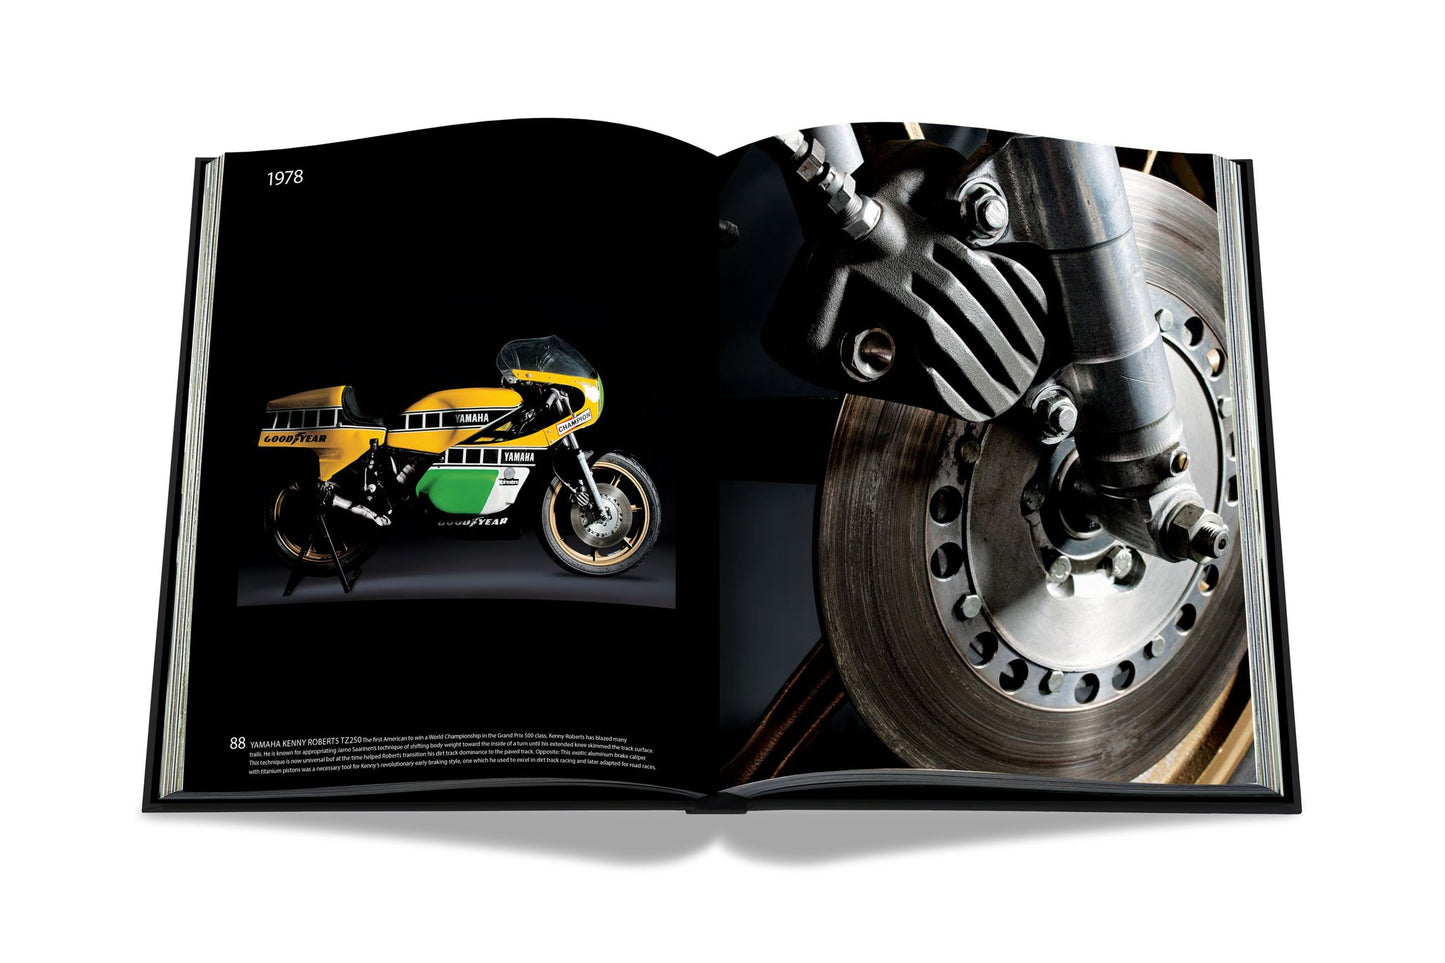 Livre Motorcycles: Impossible collection